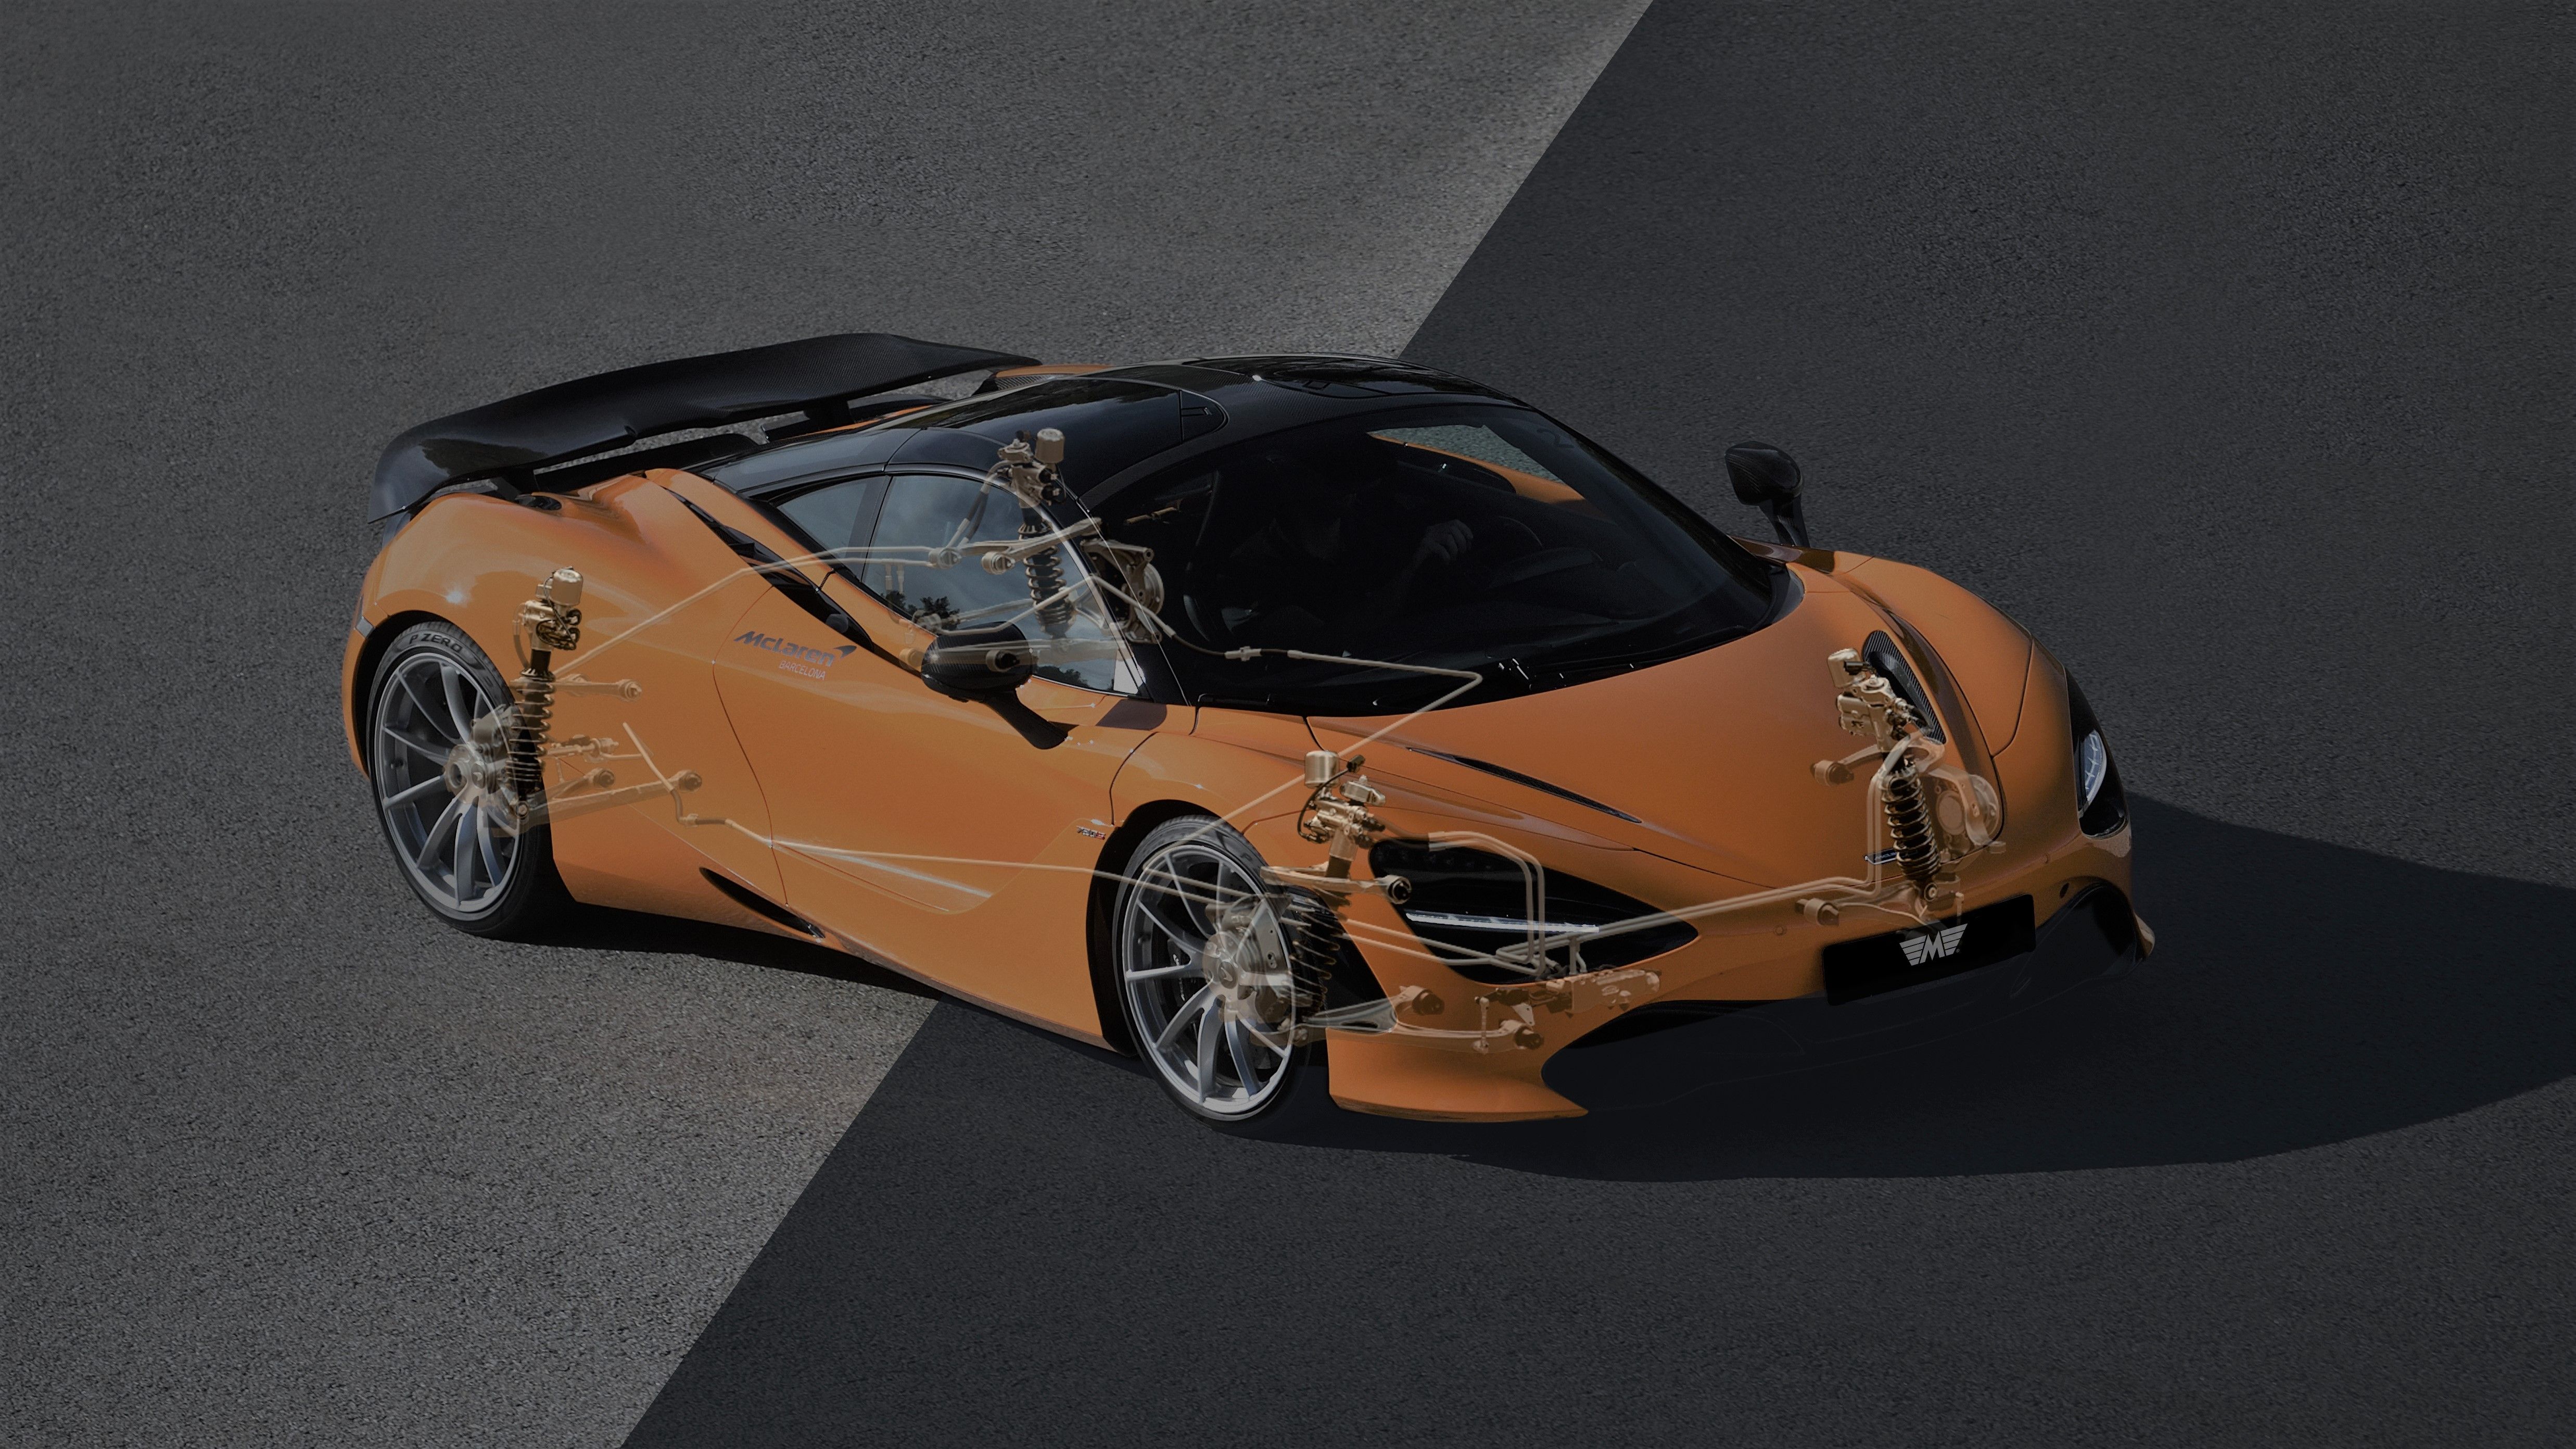 The Monroe® Intelligent Suspension Kinetic® system is feature on most McLaren models